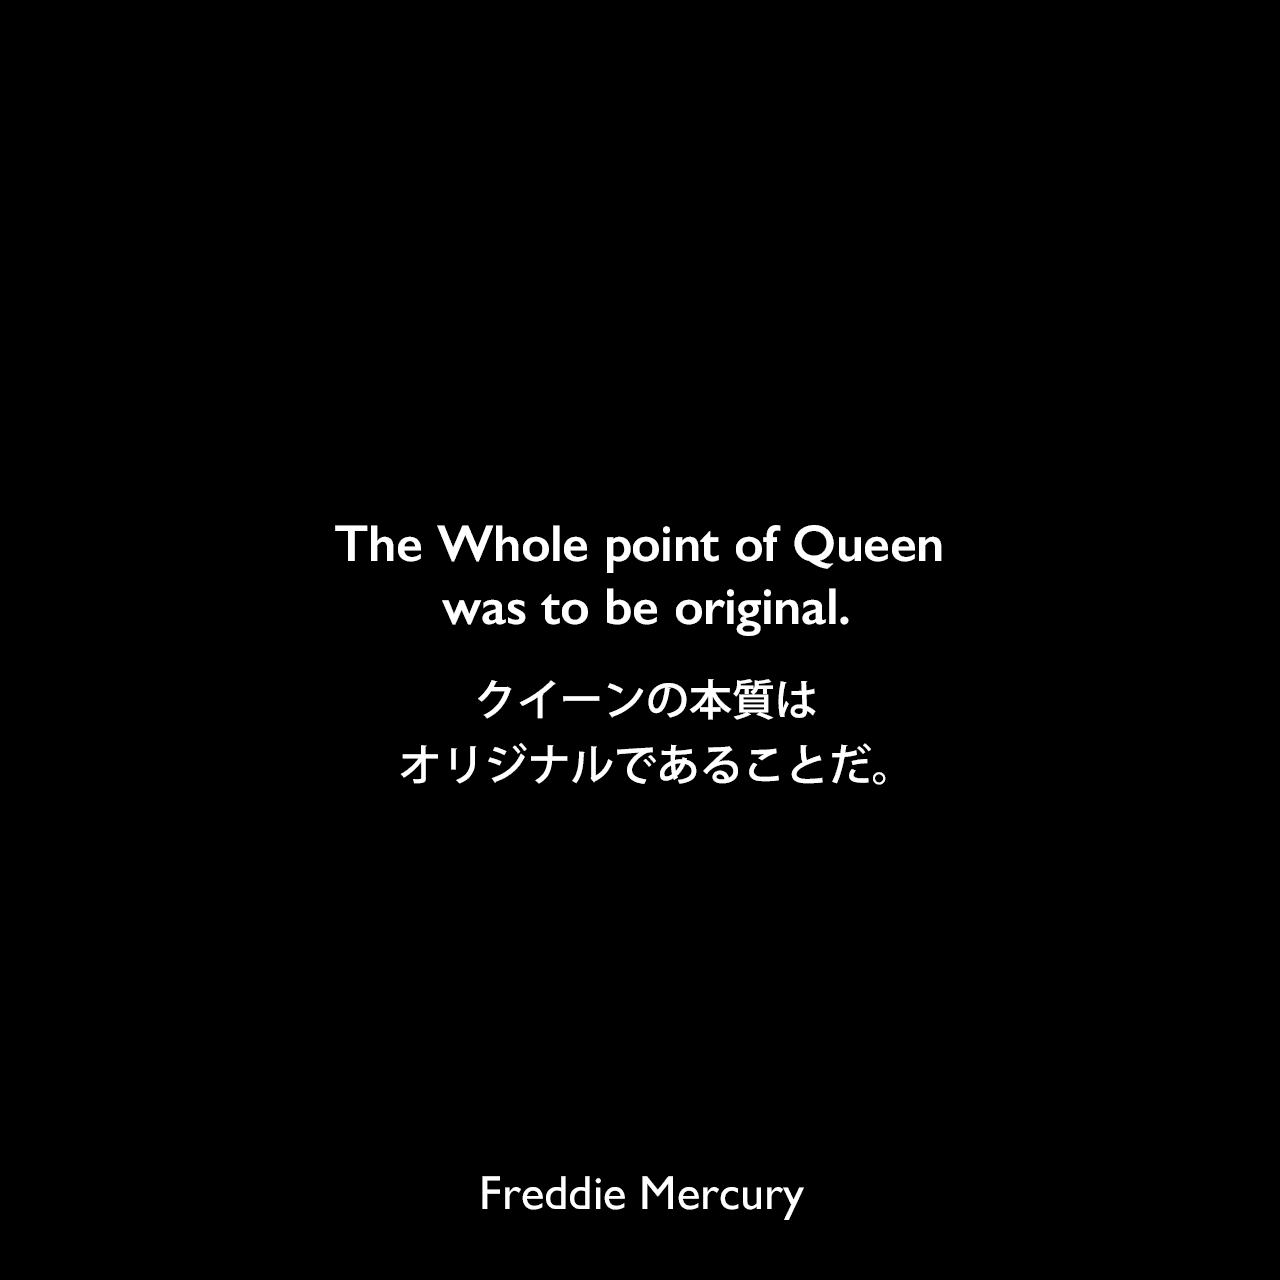 The Whole point of Queen was to be original.クイーンの本質はオリジナルであることだ。Freddie Mercury